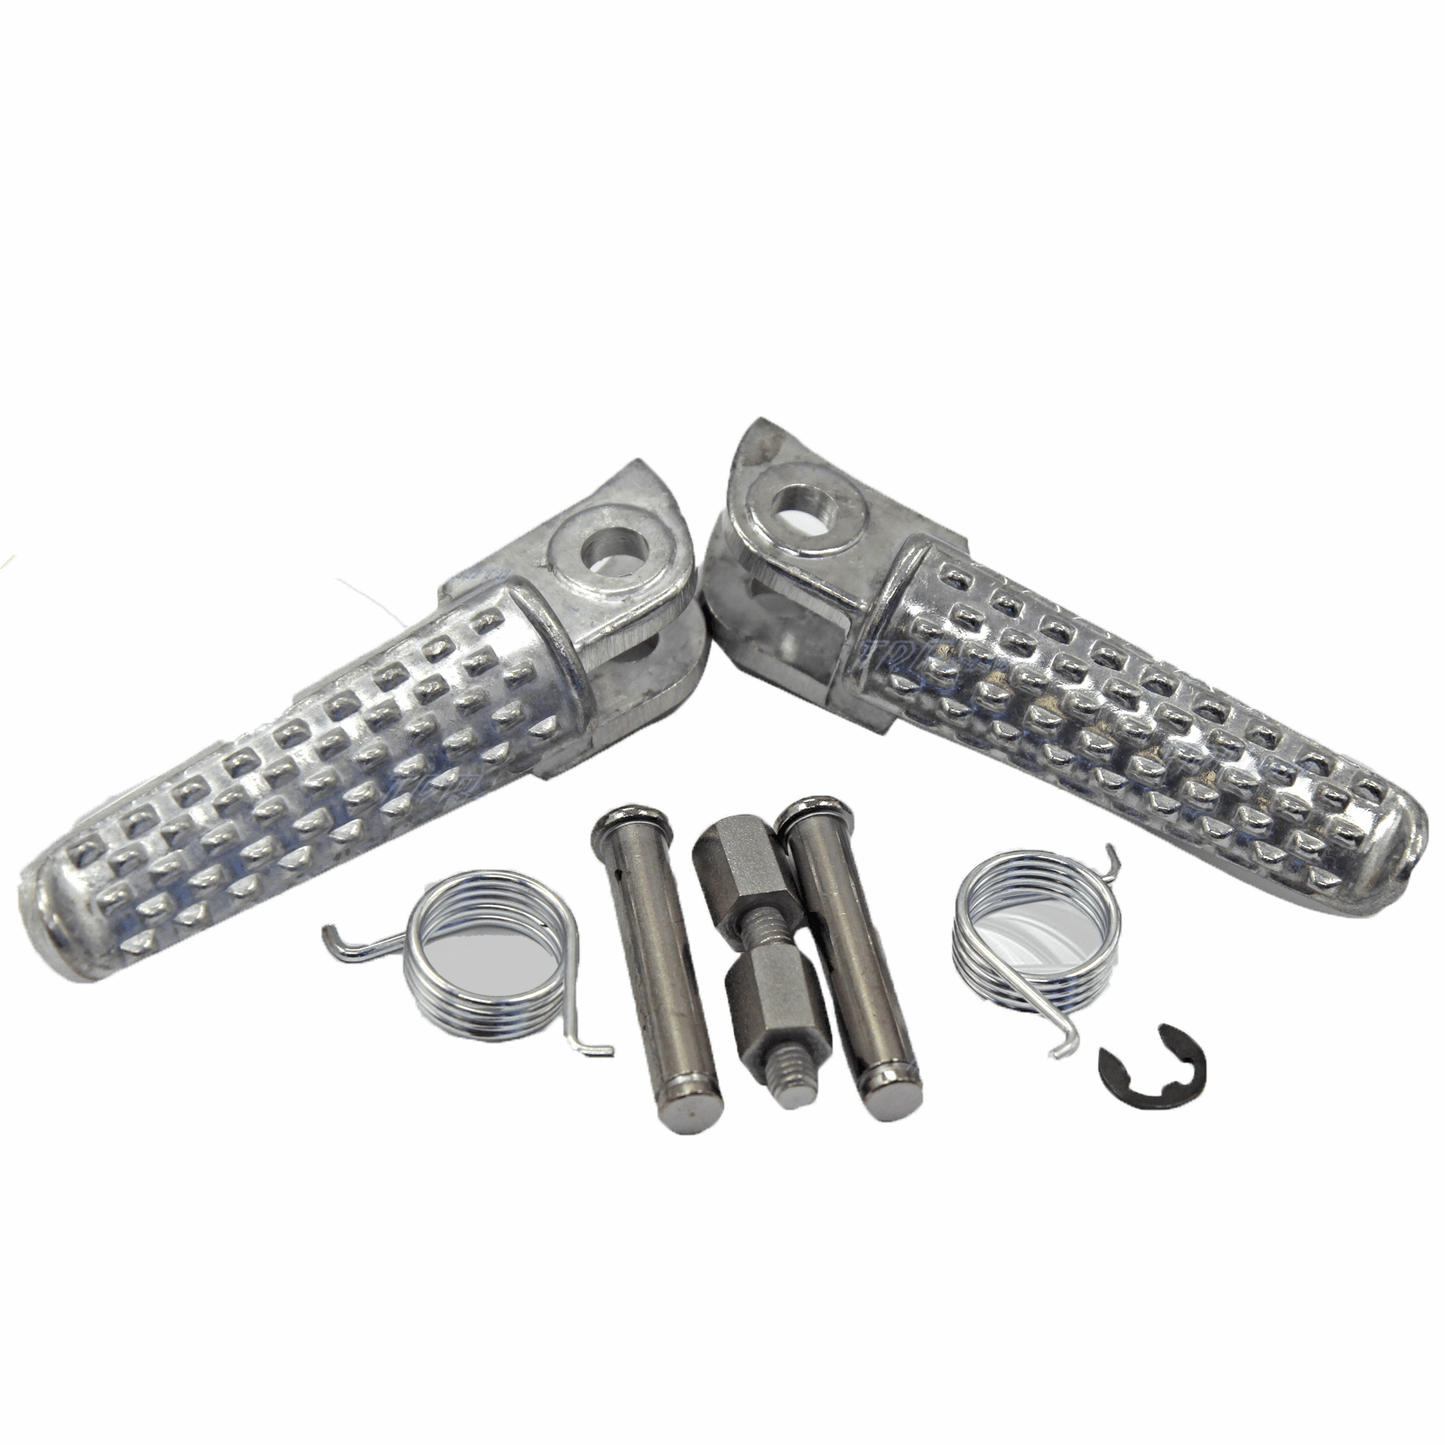 Silver Front Rider's Foot Pegs Footpegs for Honda CBR 600 / 1000 RR Motorcycle - TDRMOTO